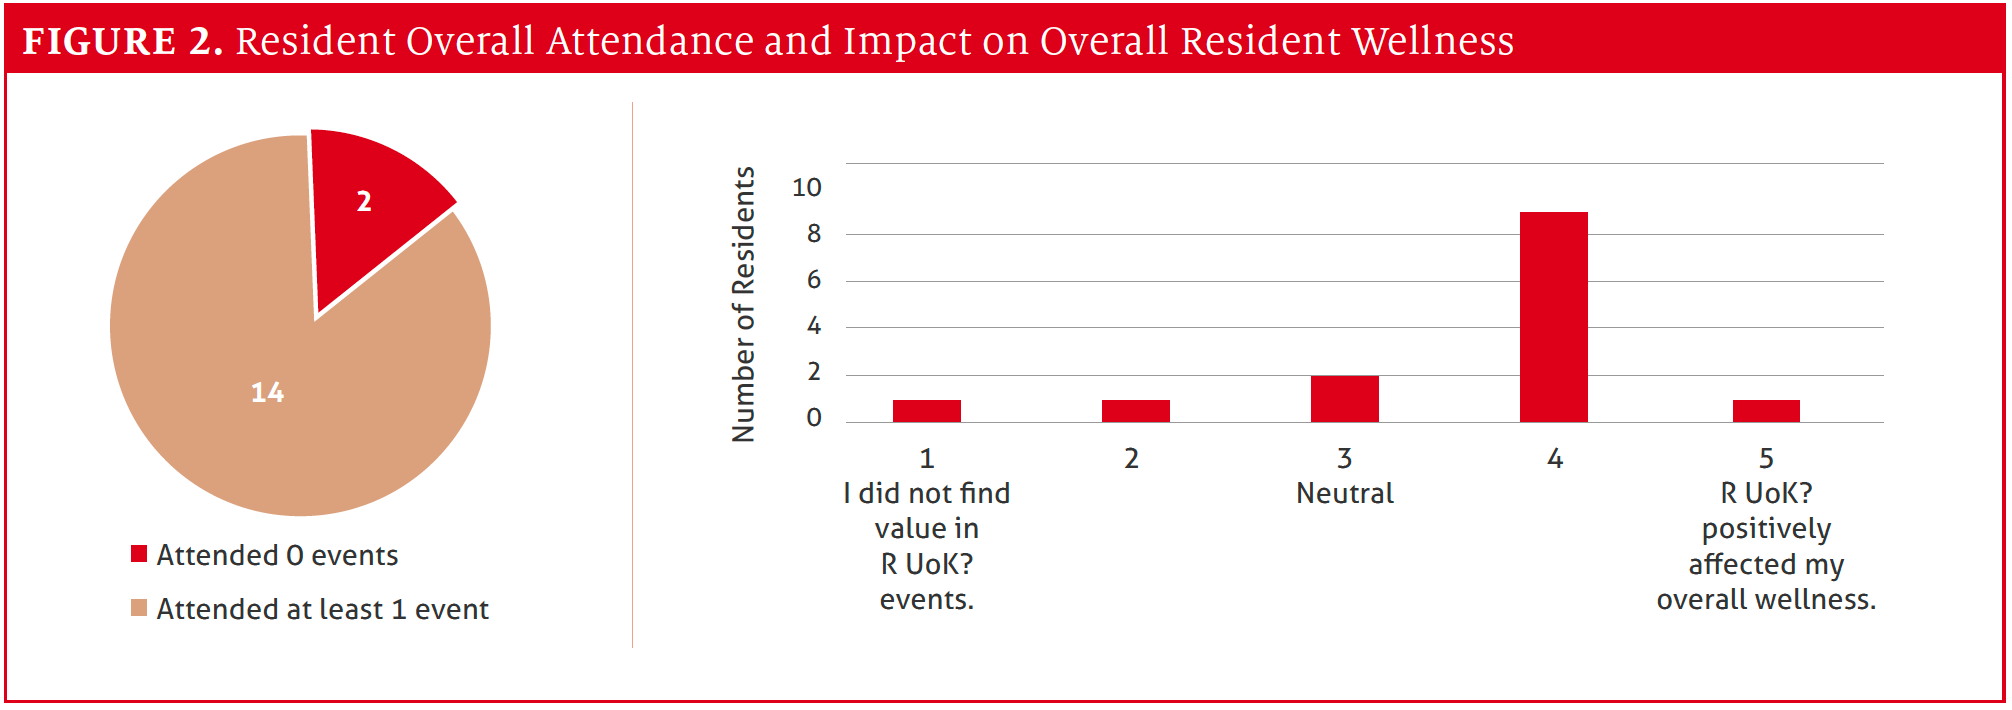 Figure 2: Resident Overall Attendance and Impact on Overall Resident Wellness